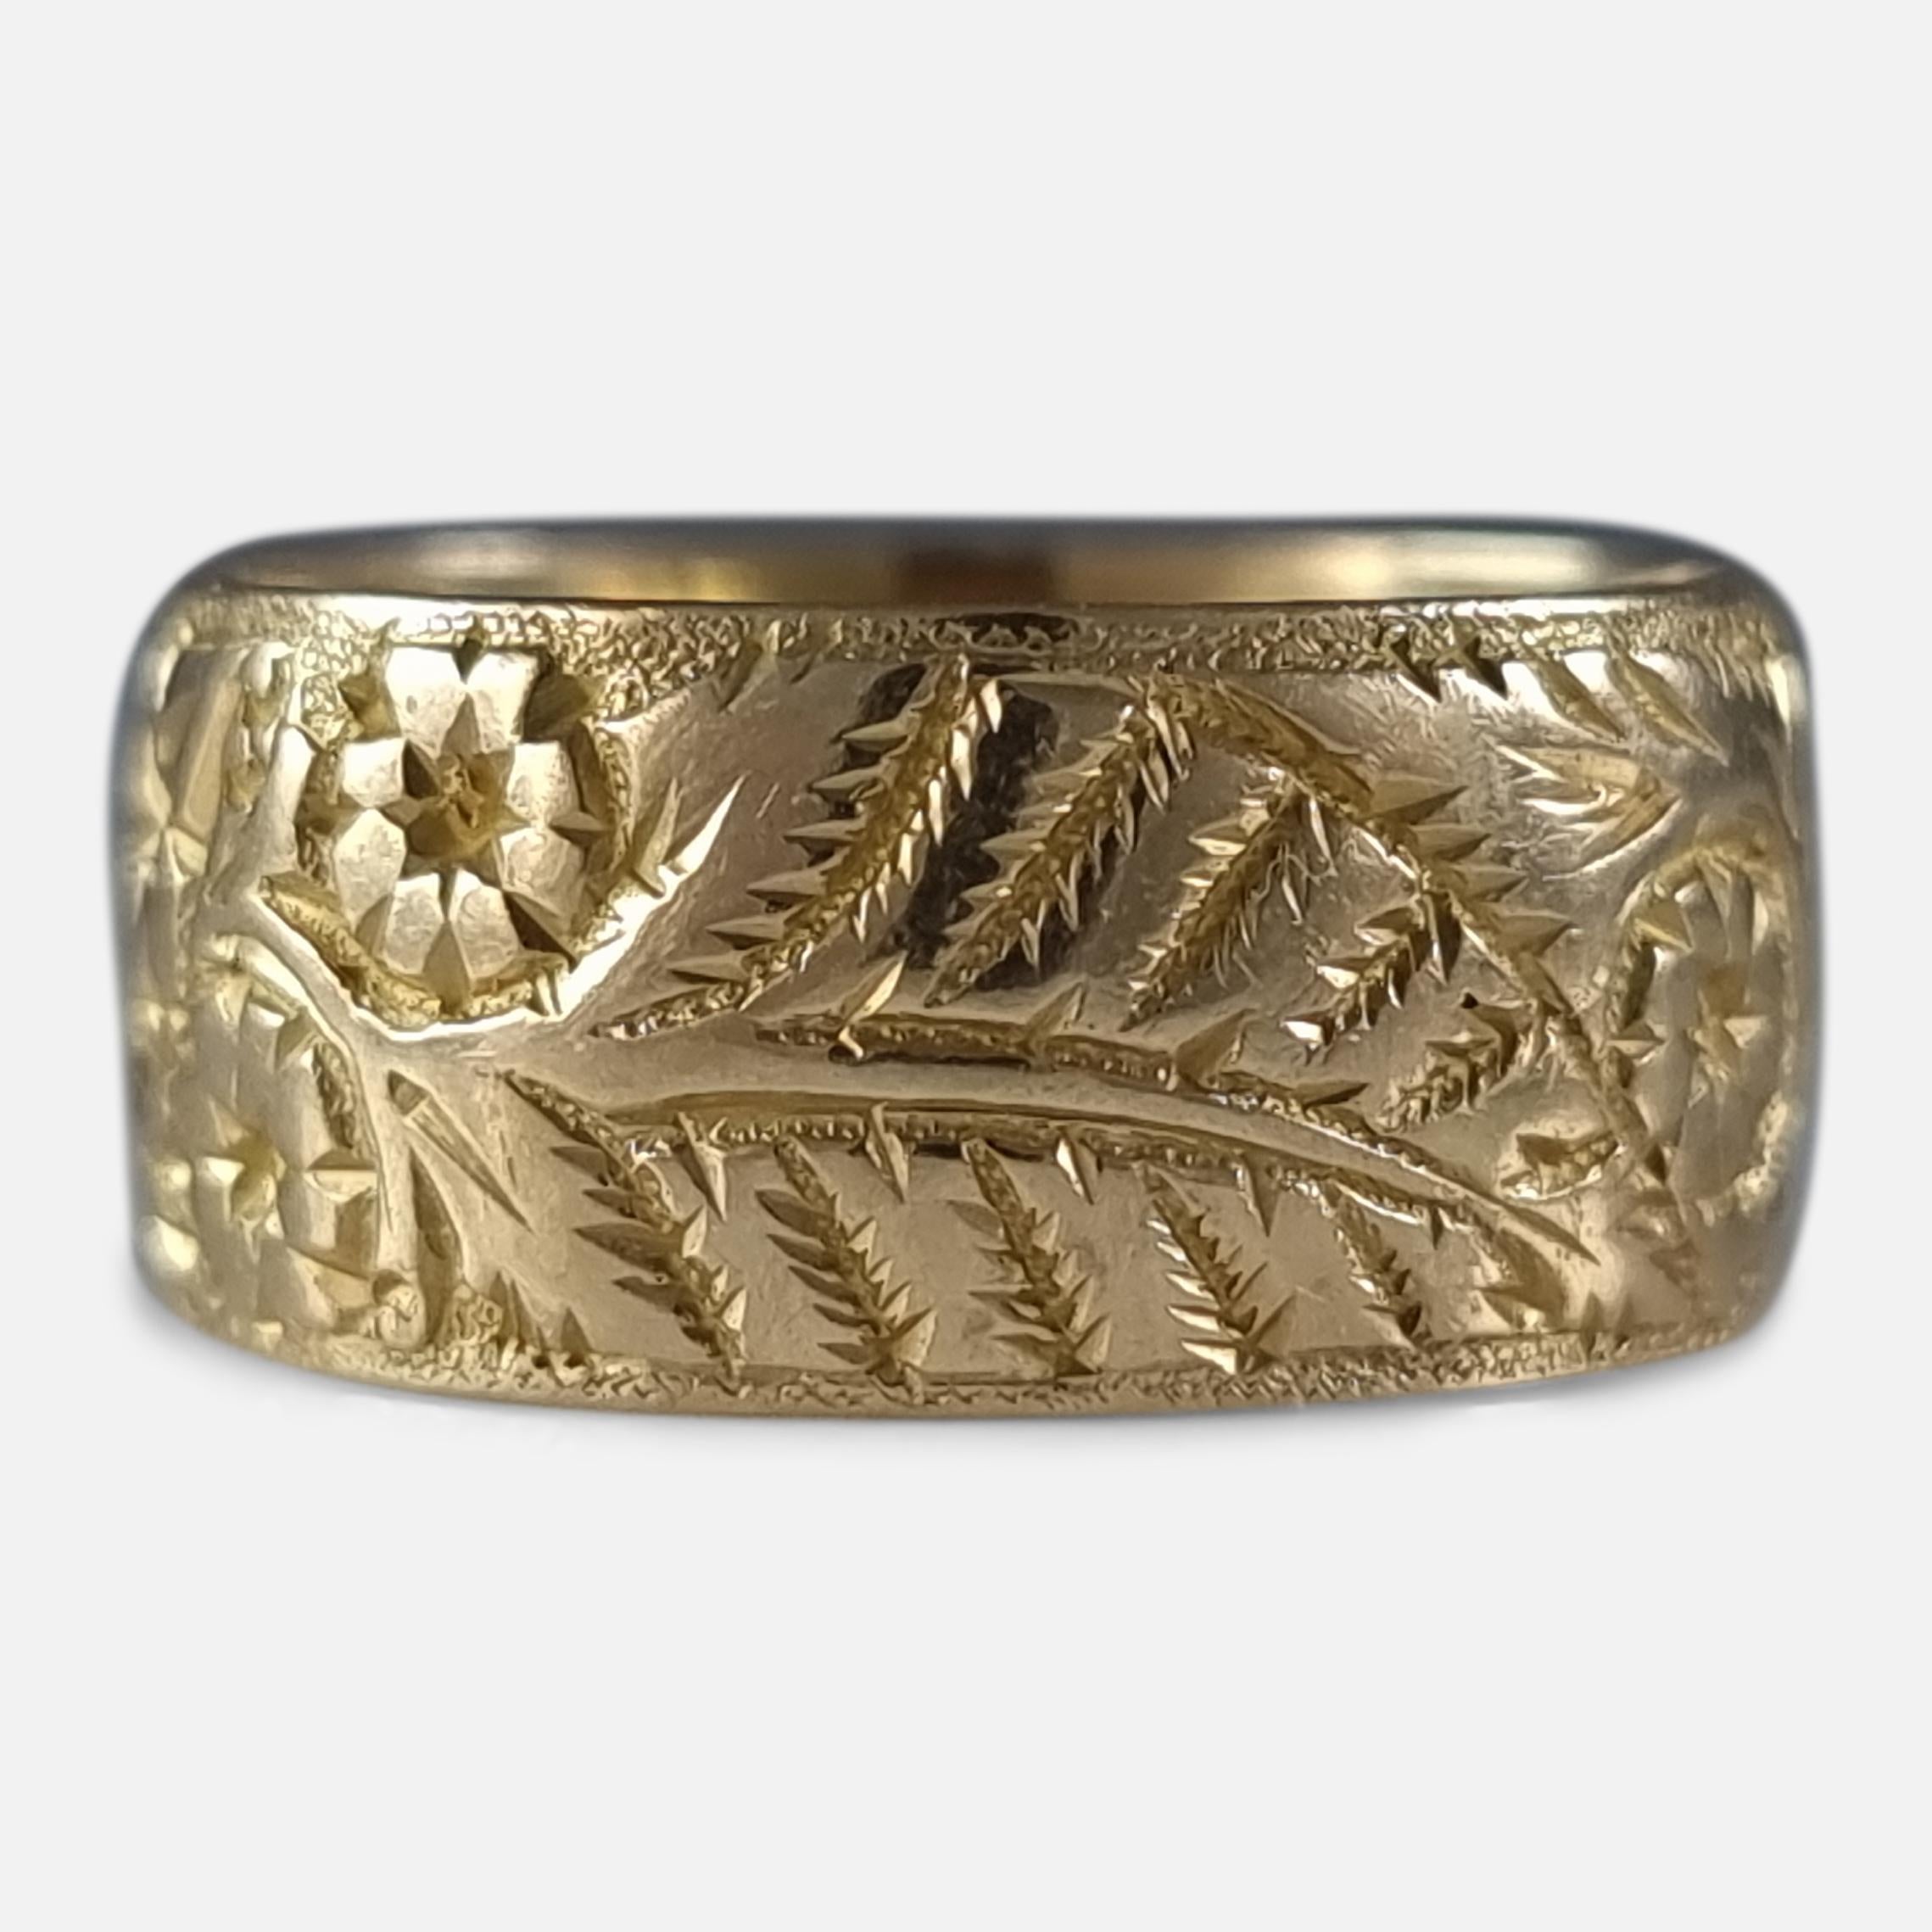 An Edwardian 18ct yellow gold engraved Keeper ring. The ring is engraved with an embossed foliate decoration.

The ring is hallmarked with Birmingham marks, '18' for 18 carat gold, and date letter 'g' to denote 1906.

Assay: - .750 Gold